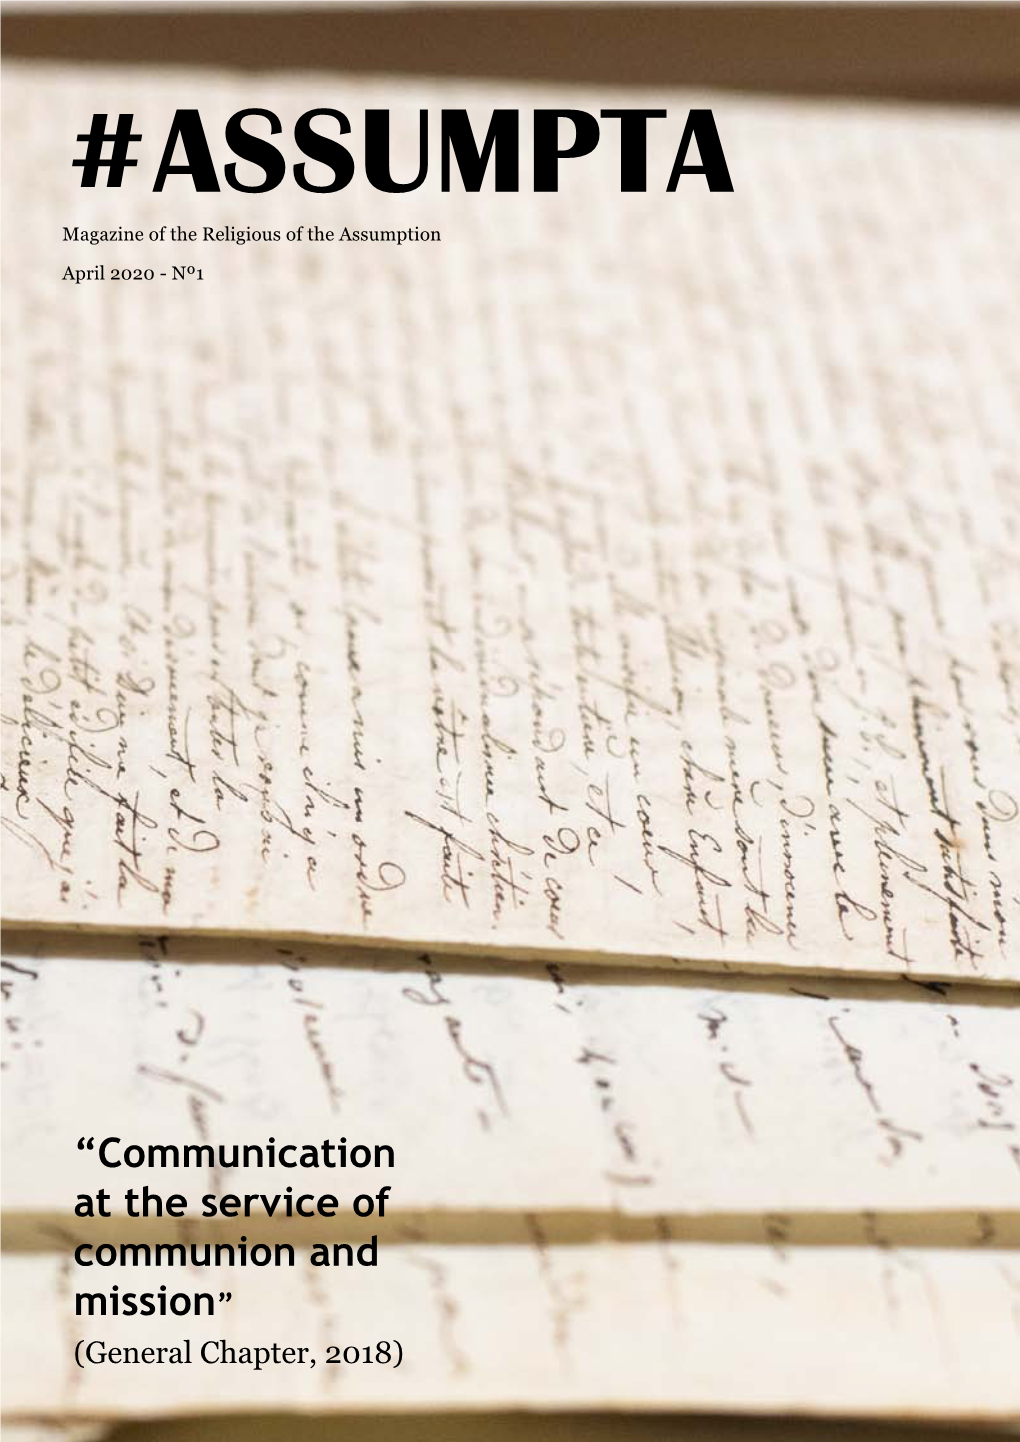 “Communication at the Service of Communion and Mission” (General Chapter, 2018) Summary Editorial “Each One of Us Has a Mission on Earth”